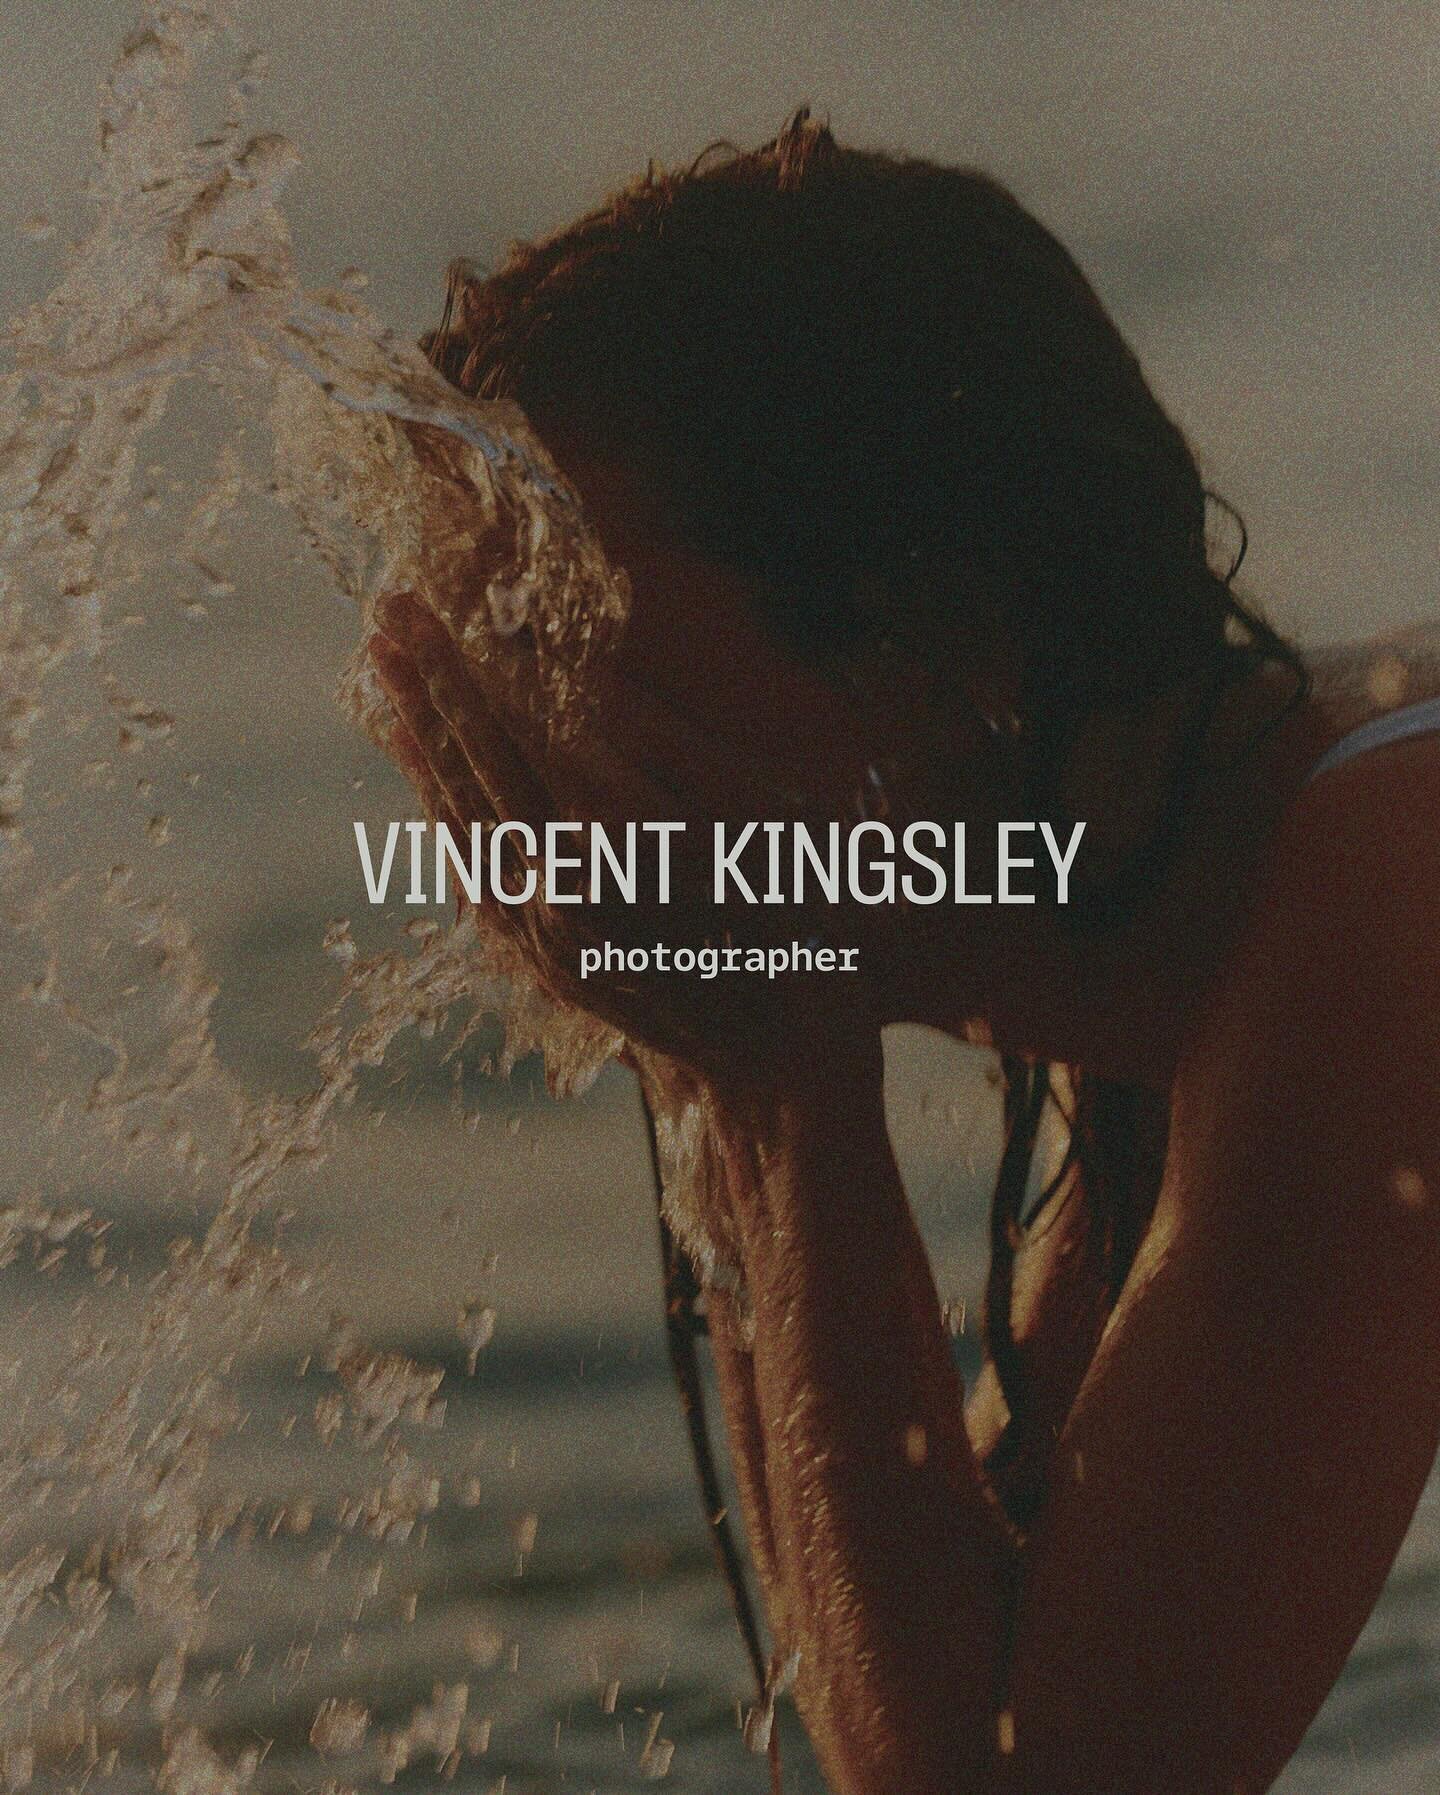 VINCENT KINGSLEY 📷 a lifestyle photographer with a modern and clean brand identity 😮&zwj;💨

Brief by @briefclub 
Fonts from @pangram.pangram 
Images from @deathtostock